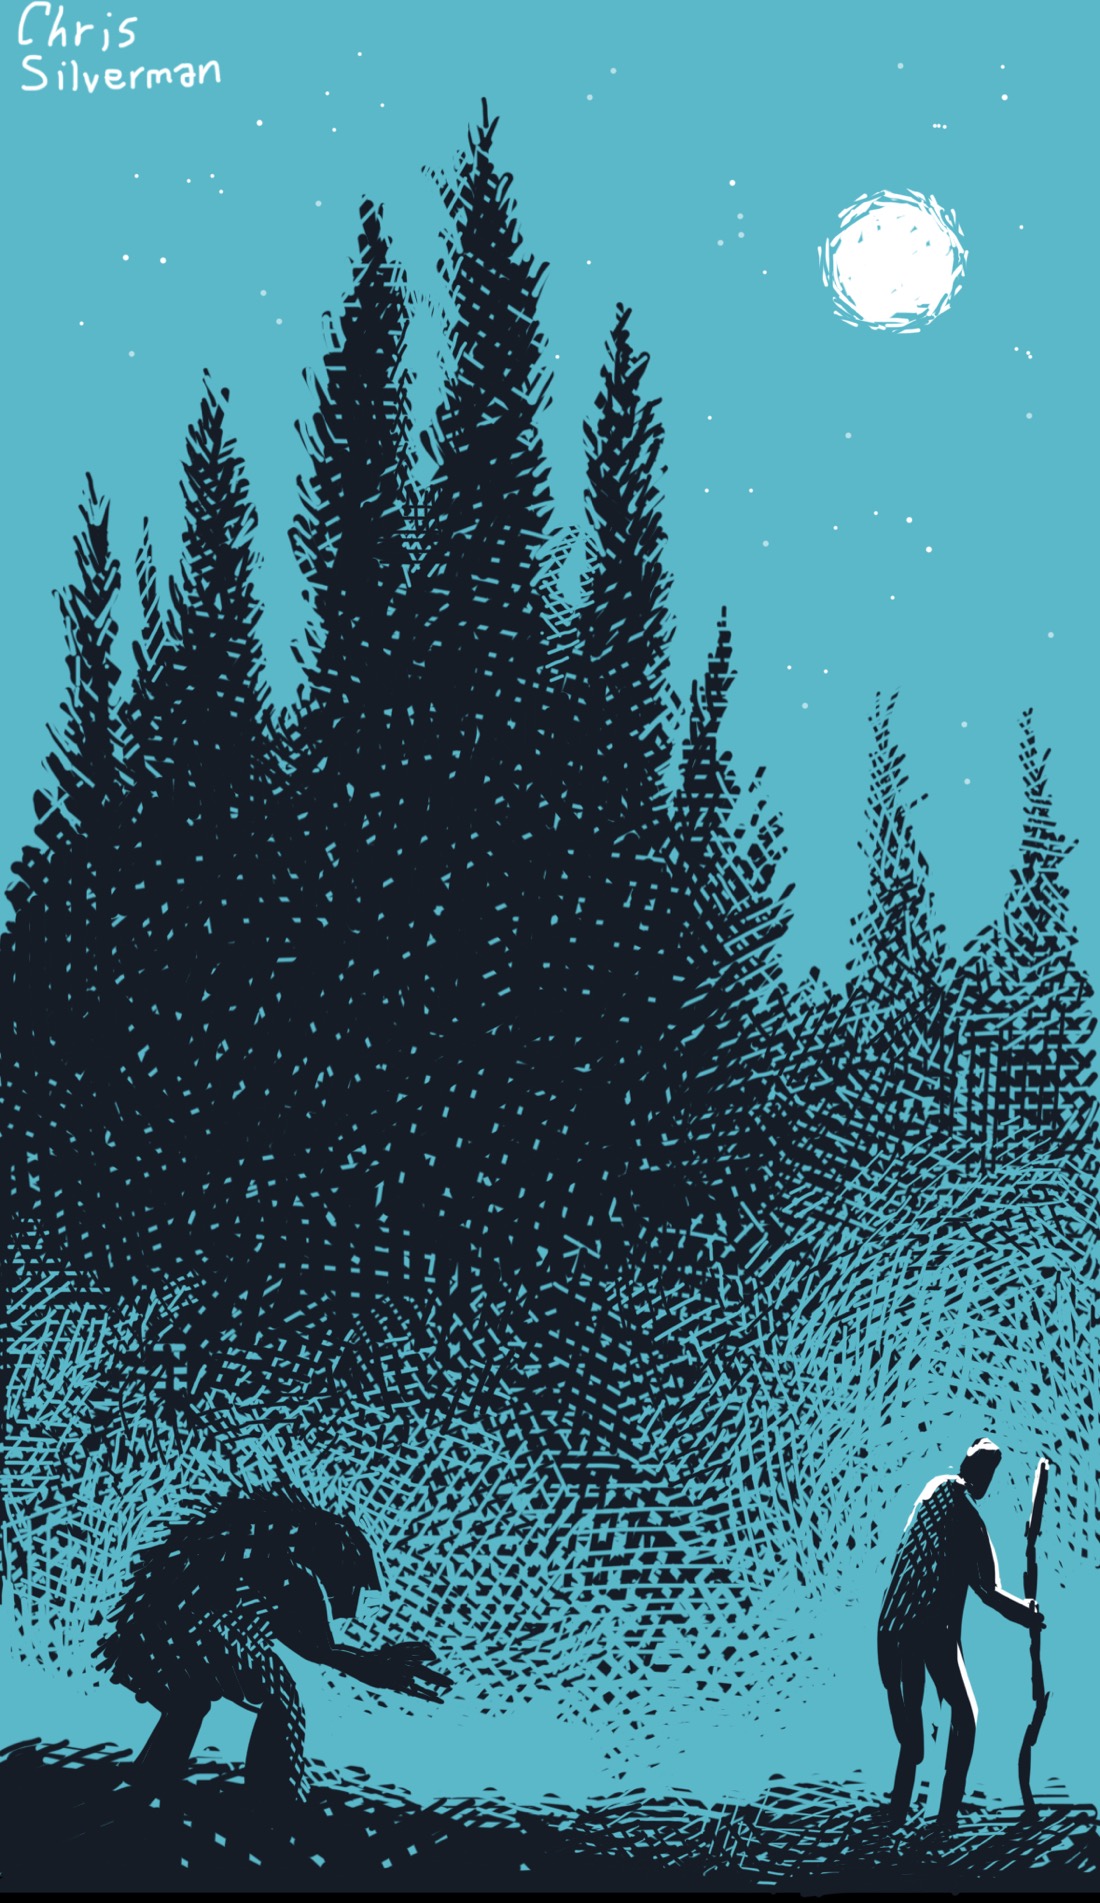 A forest at night: the full moon high in the sky, and a black wall of narrow, twisted pines. A low fog hangs over a path. Walking along the path, on the right side of the drawing, is a person holding a walking stick, the moonlight reflecting off them. They are going to need that stick, because creeping directly behind them, crouched and ready, is something else: something vaguely humanoid but furry and brutish; something that does not look like it comes out during the day. The drawing is black ink on a dark teal background. The moon and the moonlight are white.